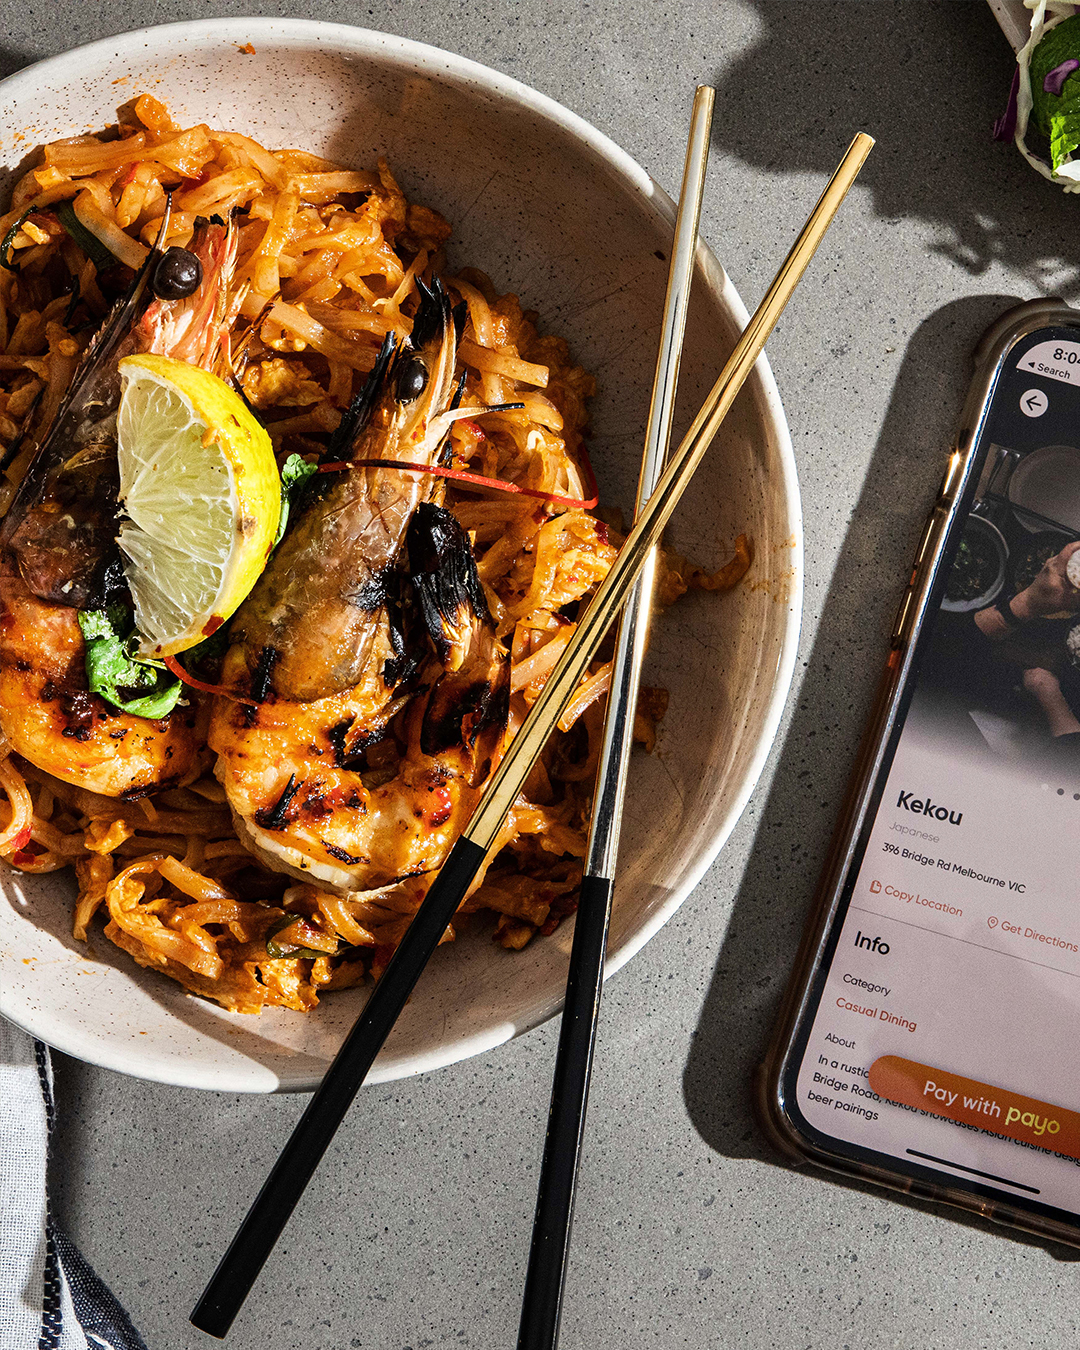 A featuring prawns next to a phone with the Payo app open